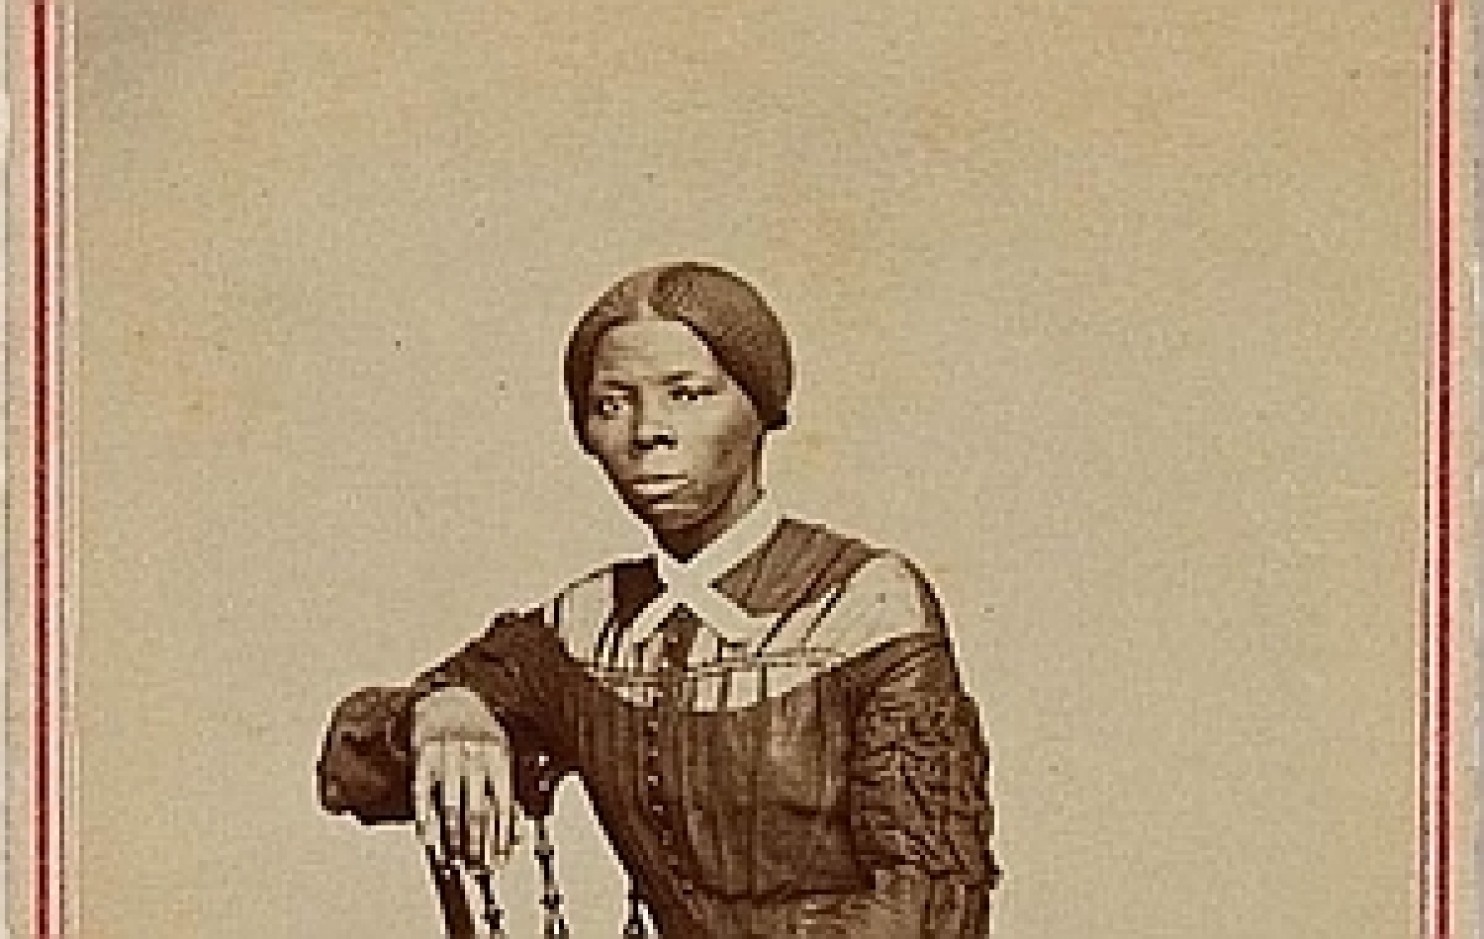 Visiting card showing young Harriet Tubman